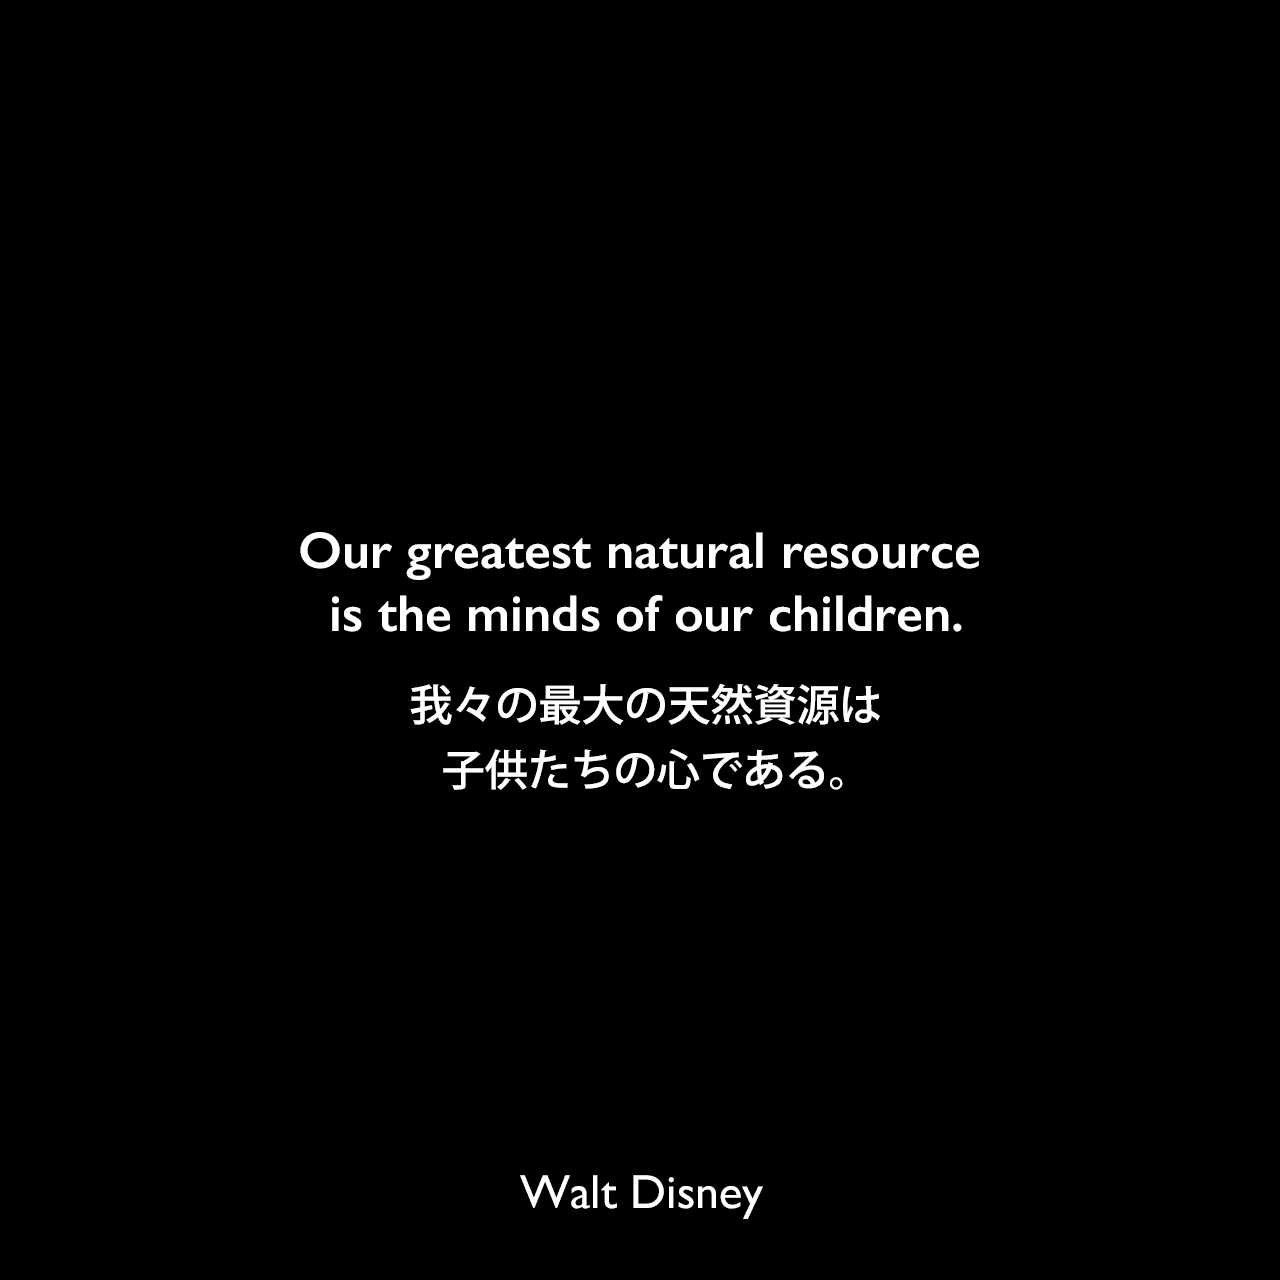 Our greatest natural resource is the minds of our children.我々の最大の天然資源は、子供たちの心である。Walt Disney